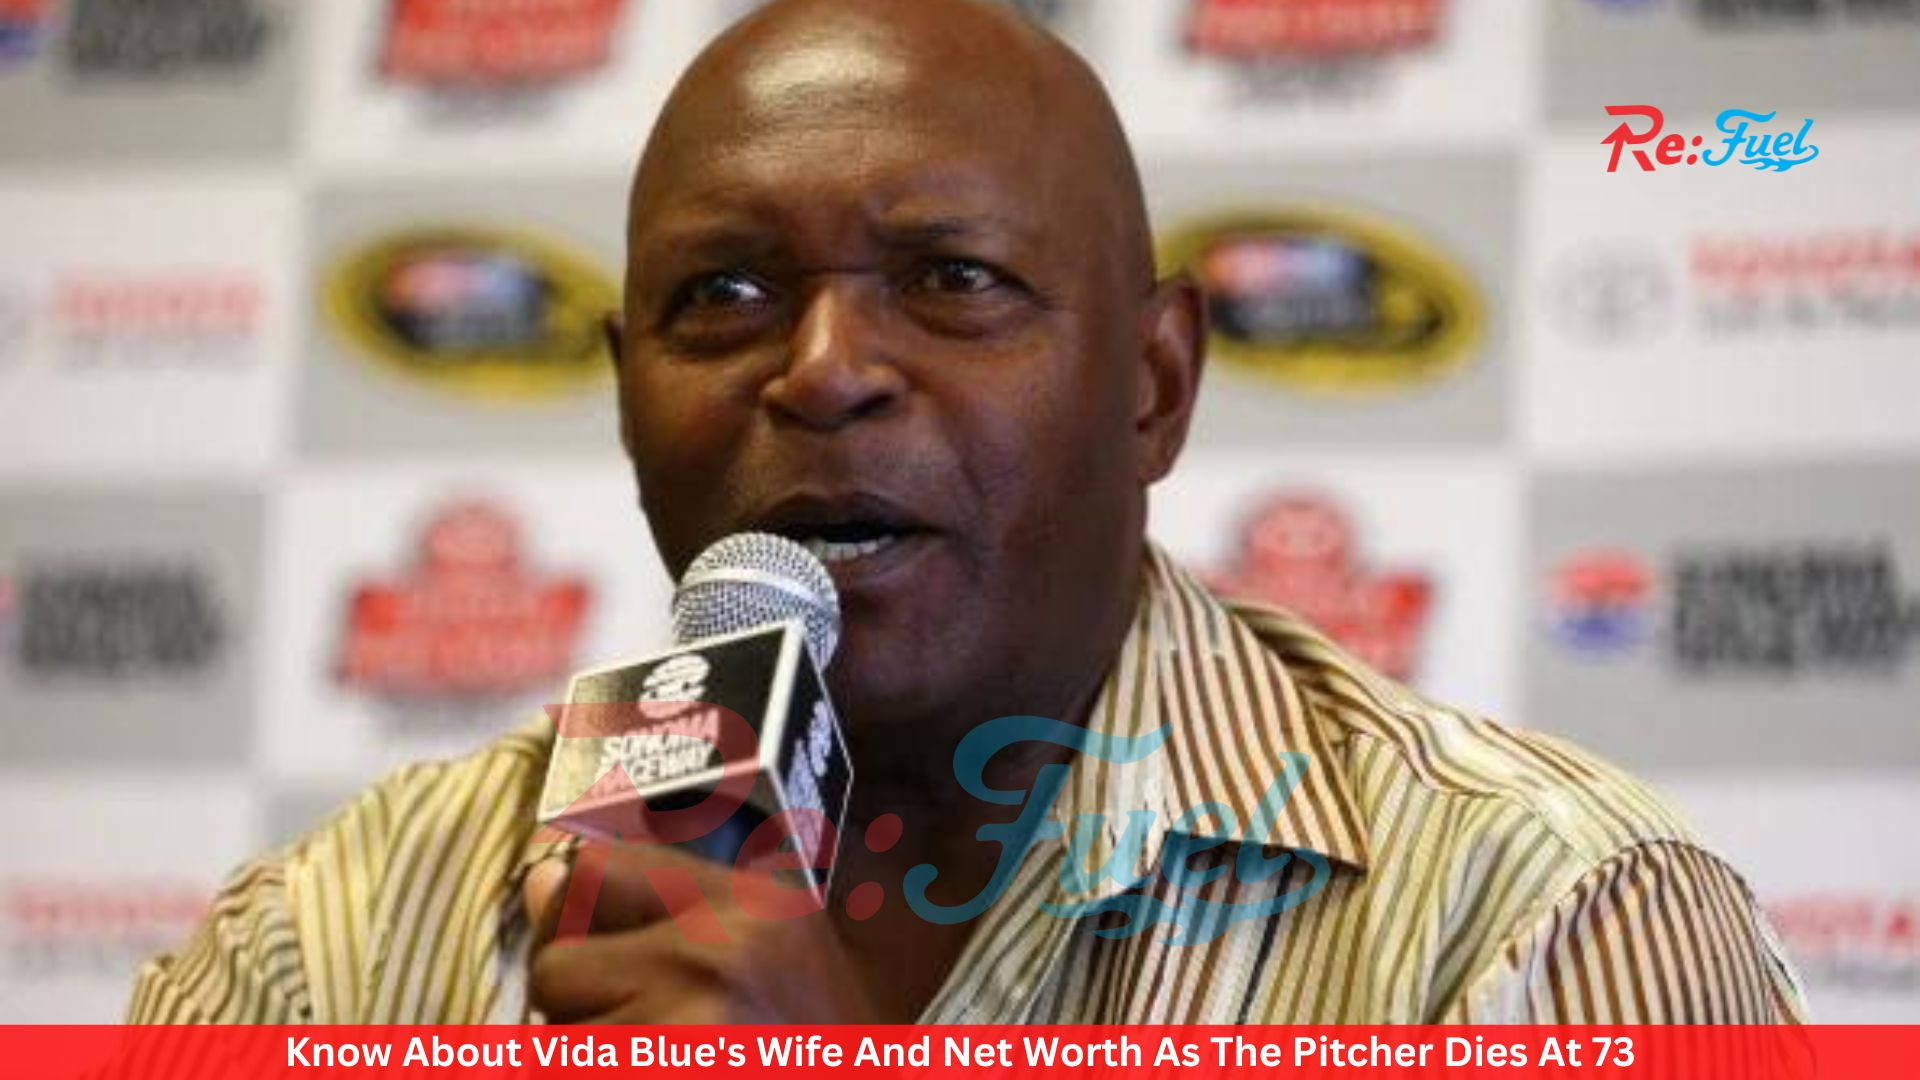 Know About Vida Blue's Wife And Net Worth As The Pitcher Dies At 73